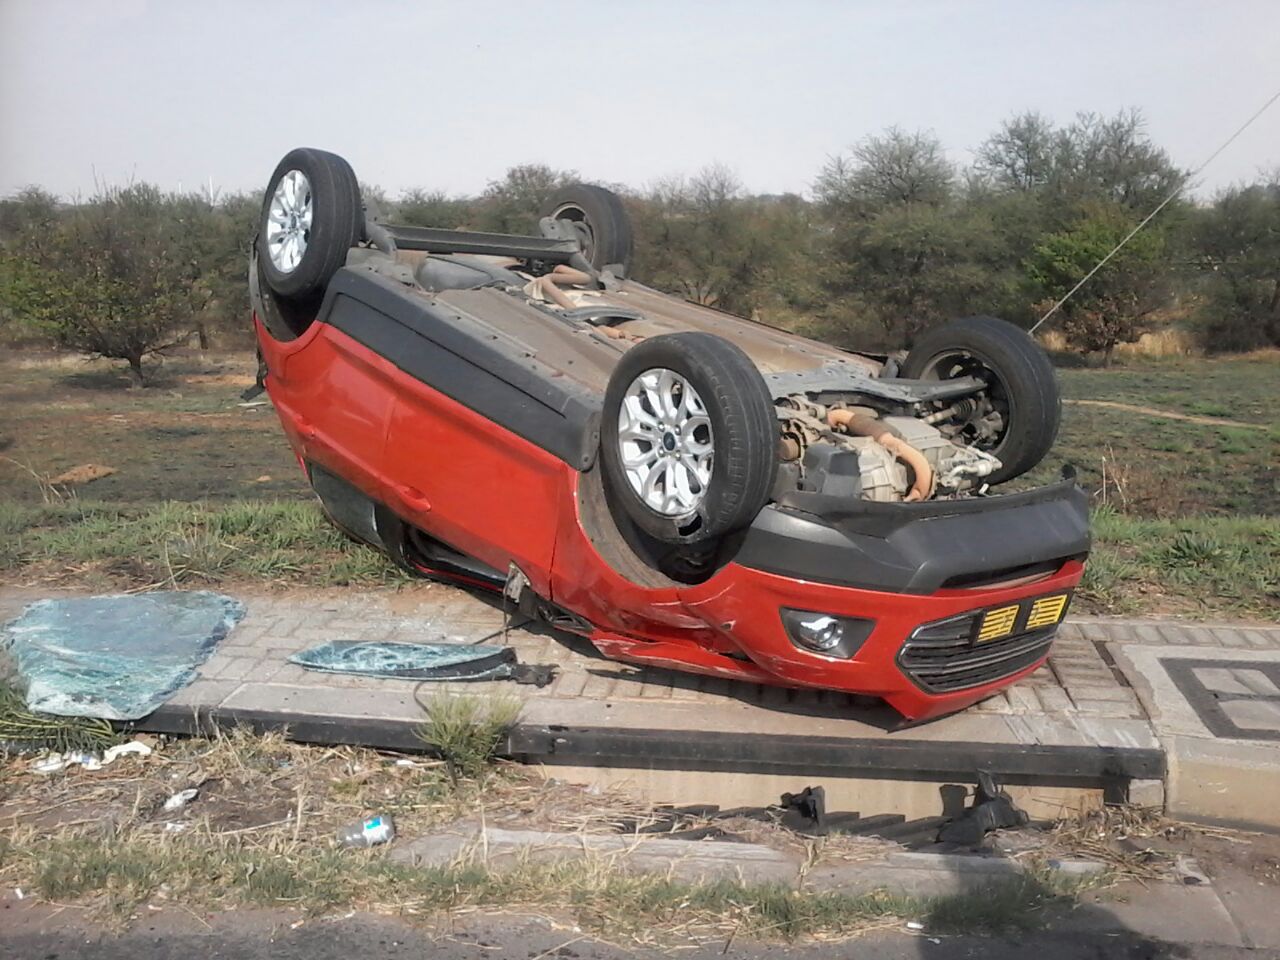 15 Year-old injured in collision in the Vaalpark area